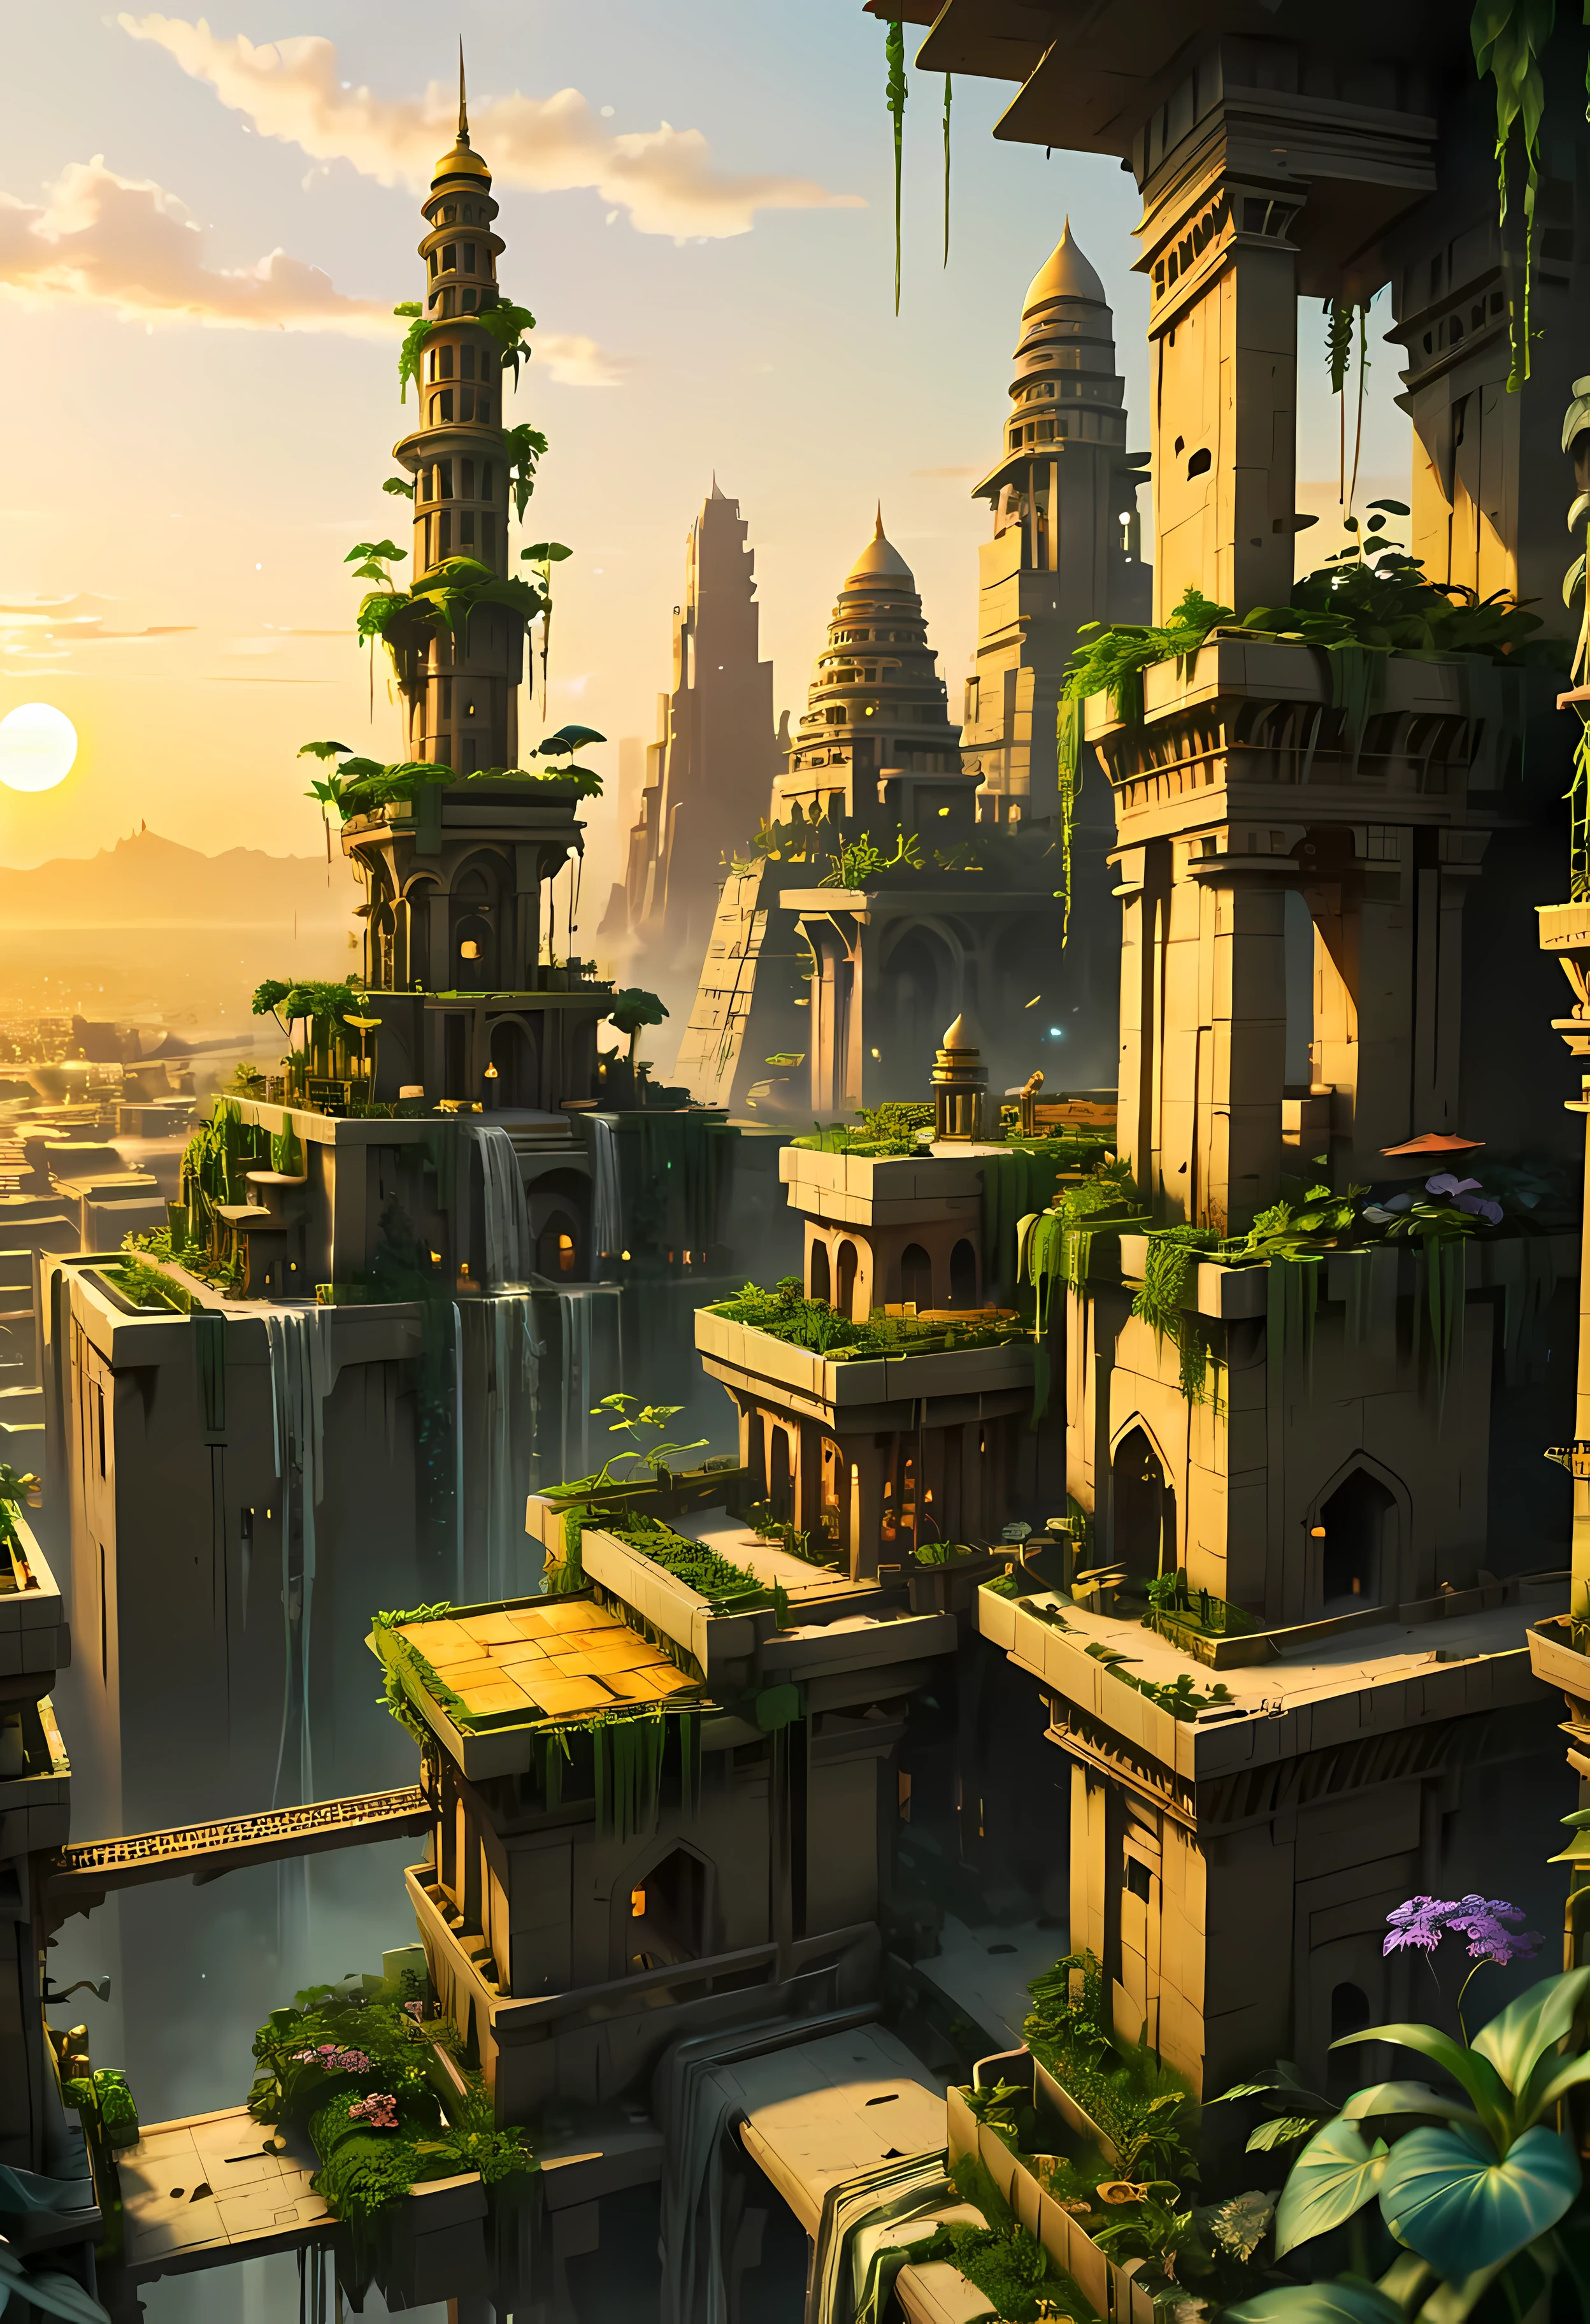 A Babylonian Hanging Garden overlooks Ancient Mesopotamian city with Majestic Tower of Bable, mesmerizing ancient tall tower by Sunset light,((golden hour time):1.2),((Lush Hanging Gardens):1.2),((Very tall Tower of Bable):1.1), delicate golden hour light, amazing wallpapers, beautiful surroundings, optimistic matte painting, Beautiful digital artwork, Ancient City of Babylon background, Beautiful and detailed scenes, UHD underground, UHD landscape, Majestic concept art, beautiful Ancient City. |(Masterpiece in maximum 16K resolution), the best quality, (very detailed CG unity 16k wallpaper quality),(Soft colors 16k highly detailed digital art),Super Detailed. | Perfect image,16k UE5,official painting, superfine, Depth of field, no contrast, clean sharp focus, professional, No blurring. | (((More detail))).